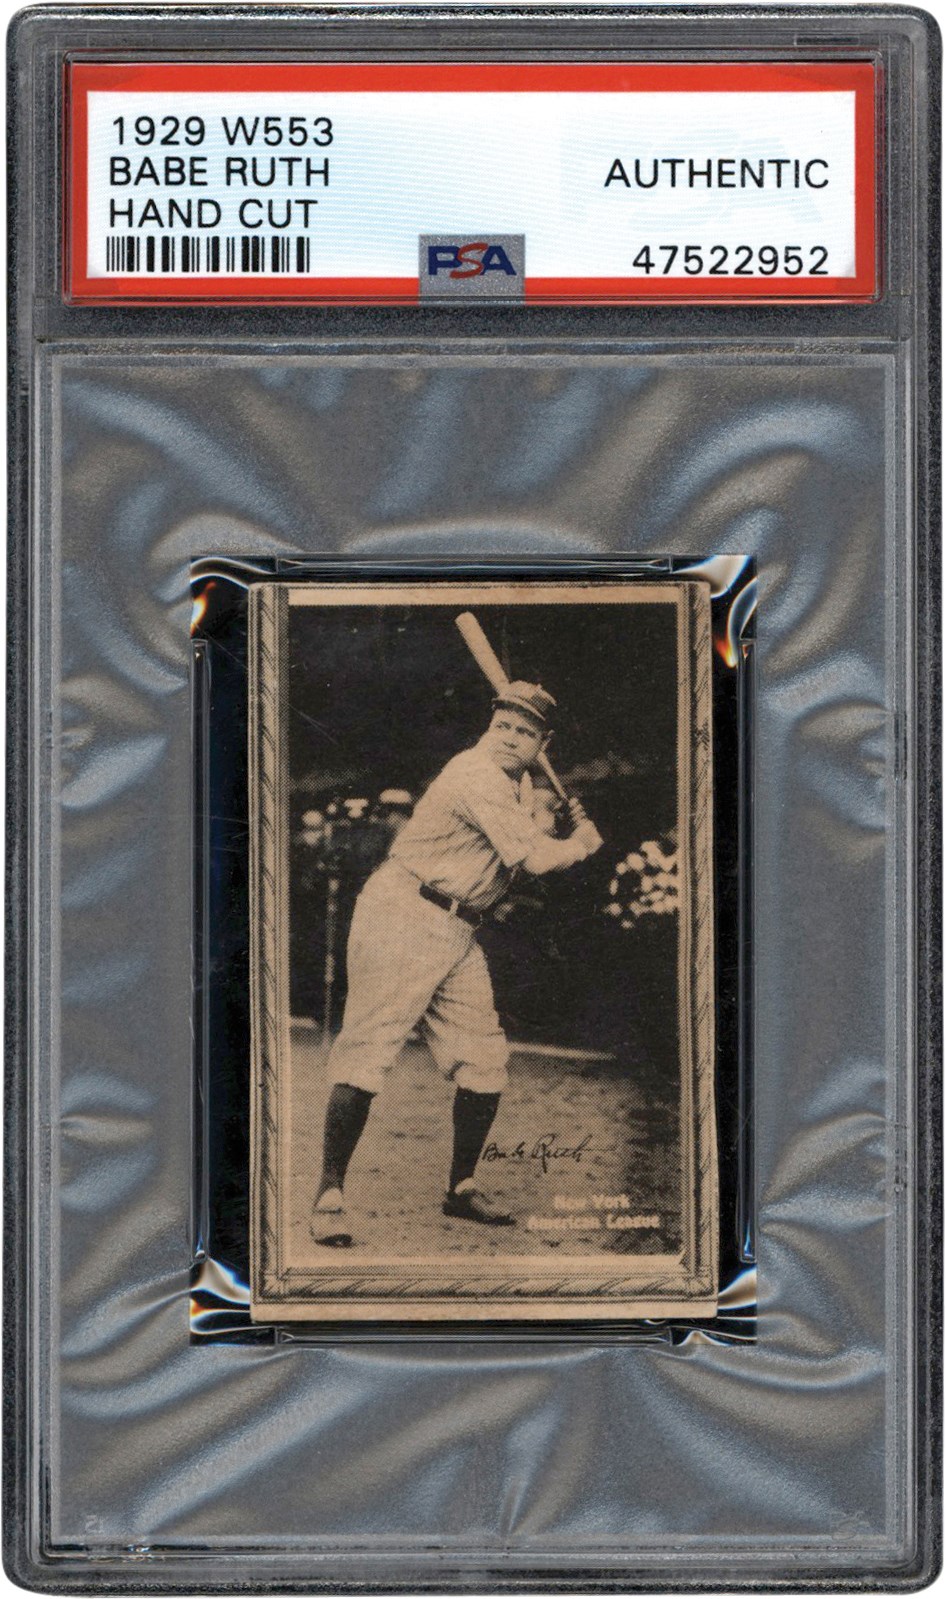 929 W553 Babe Ruth PSA Authentic